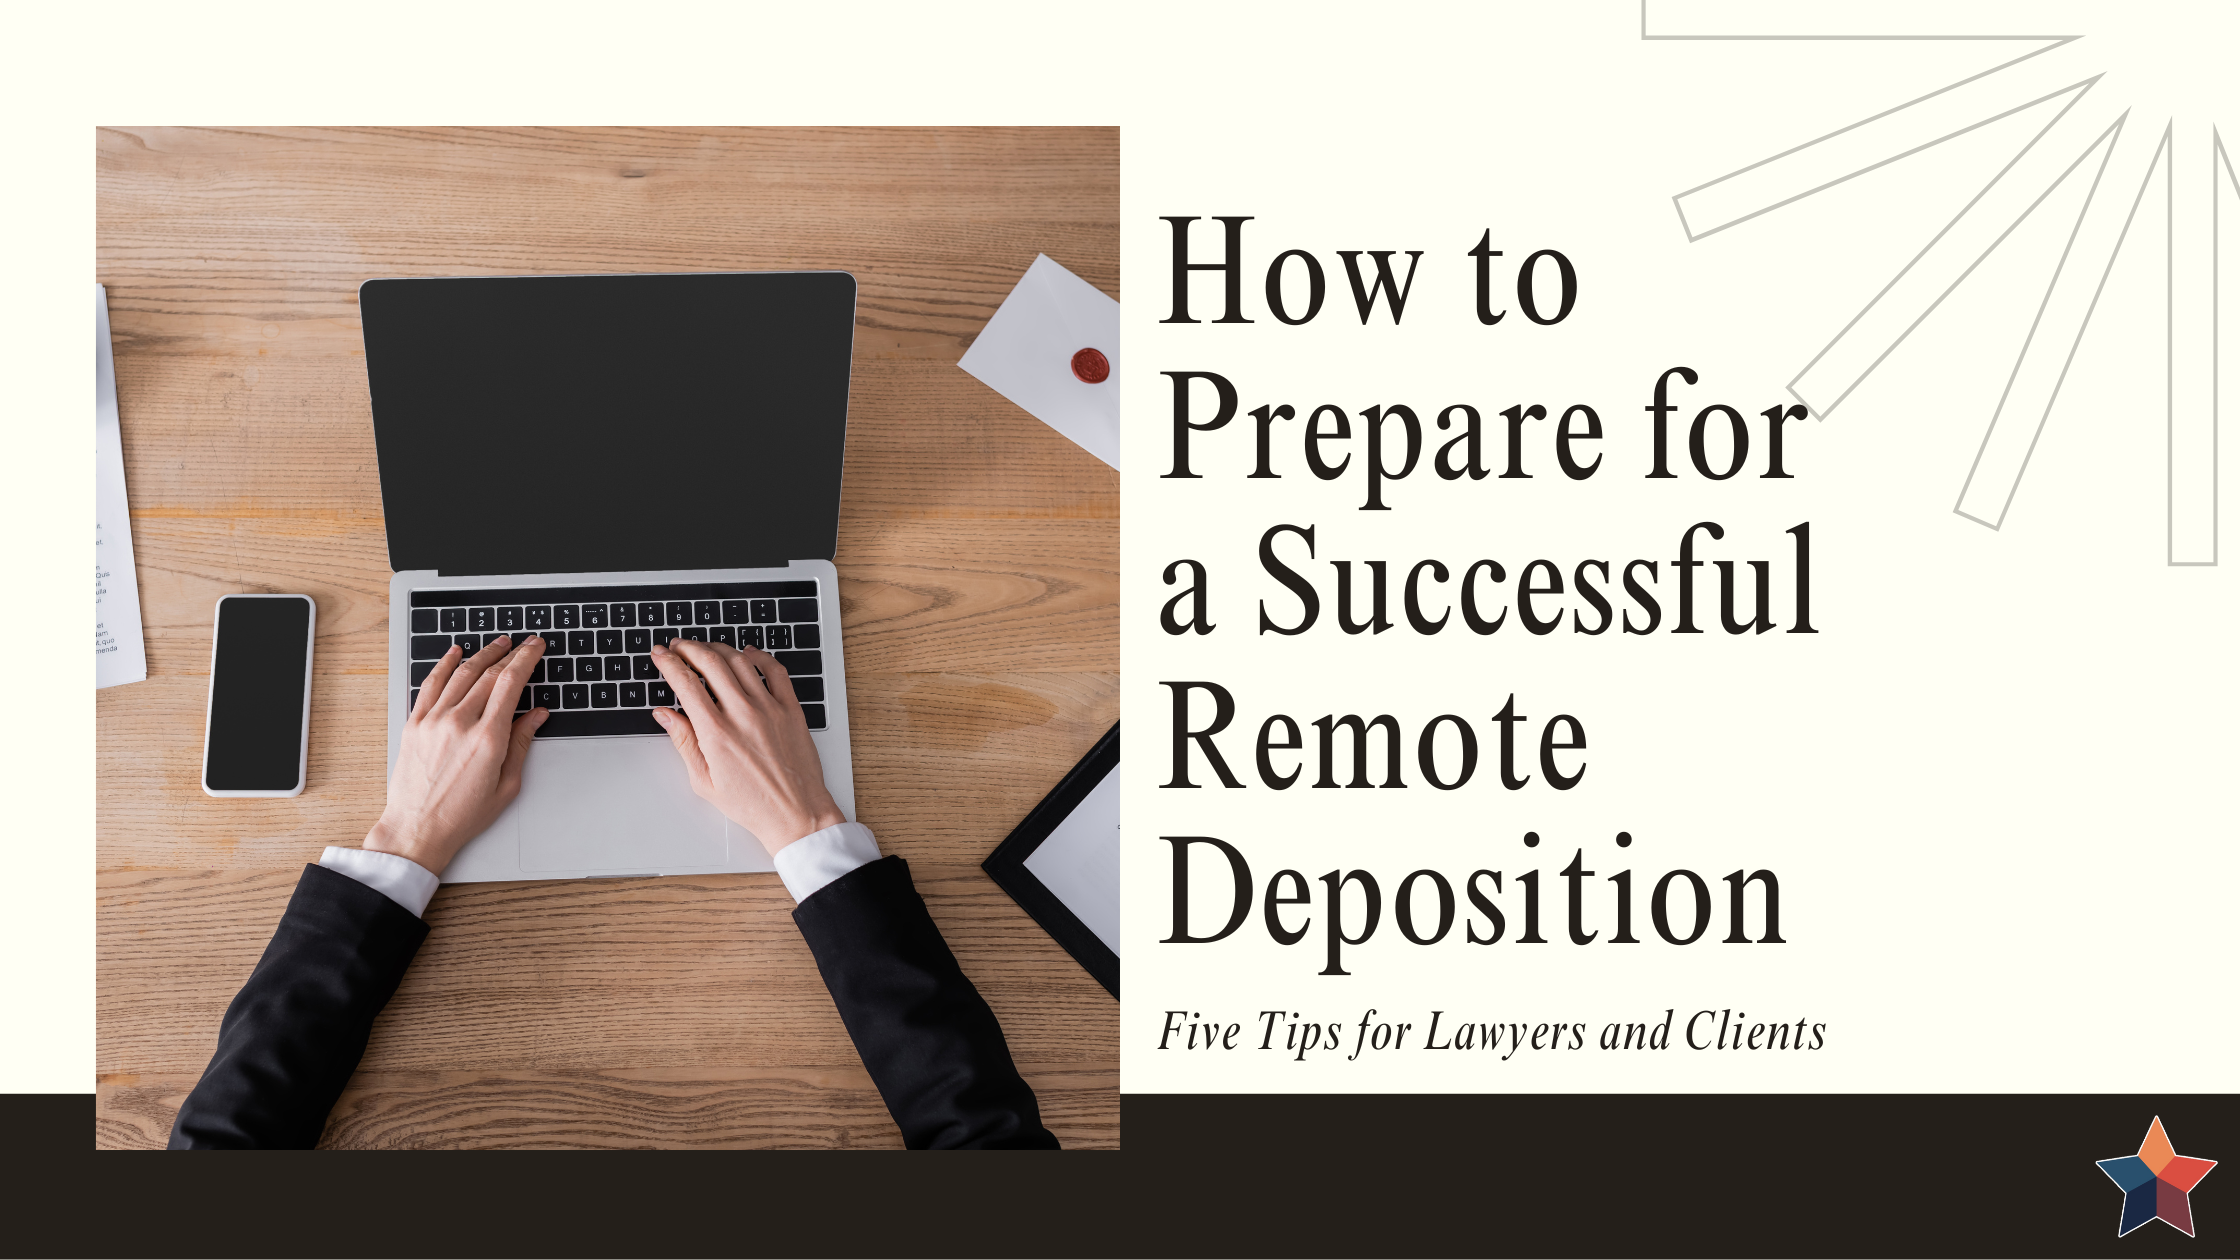 Remote Depositions